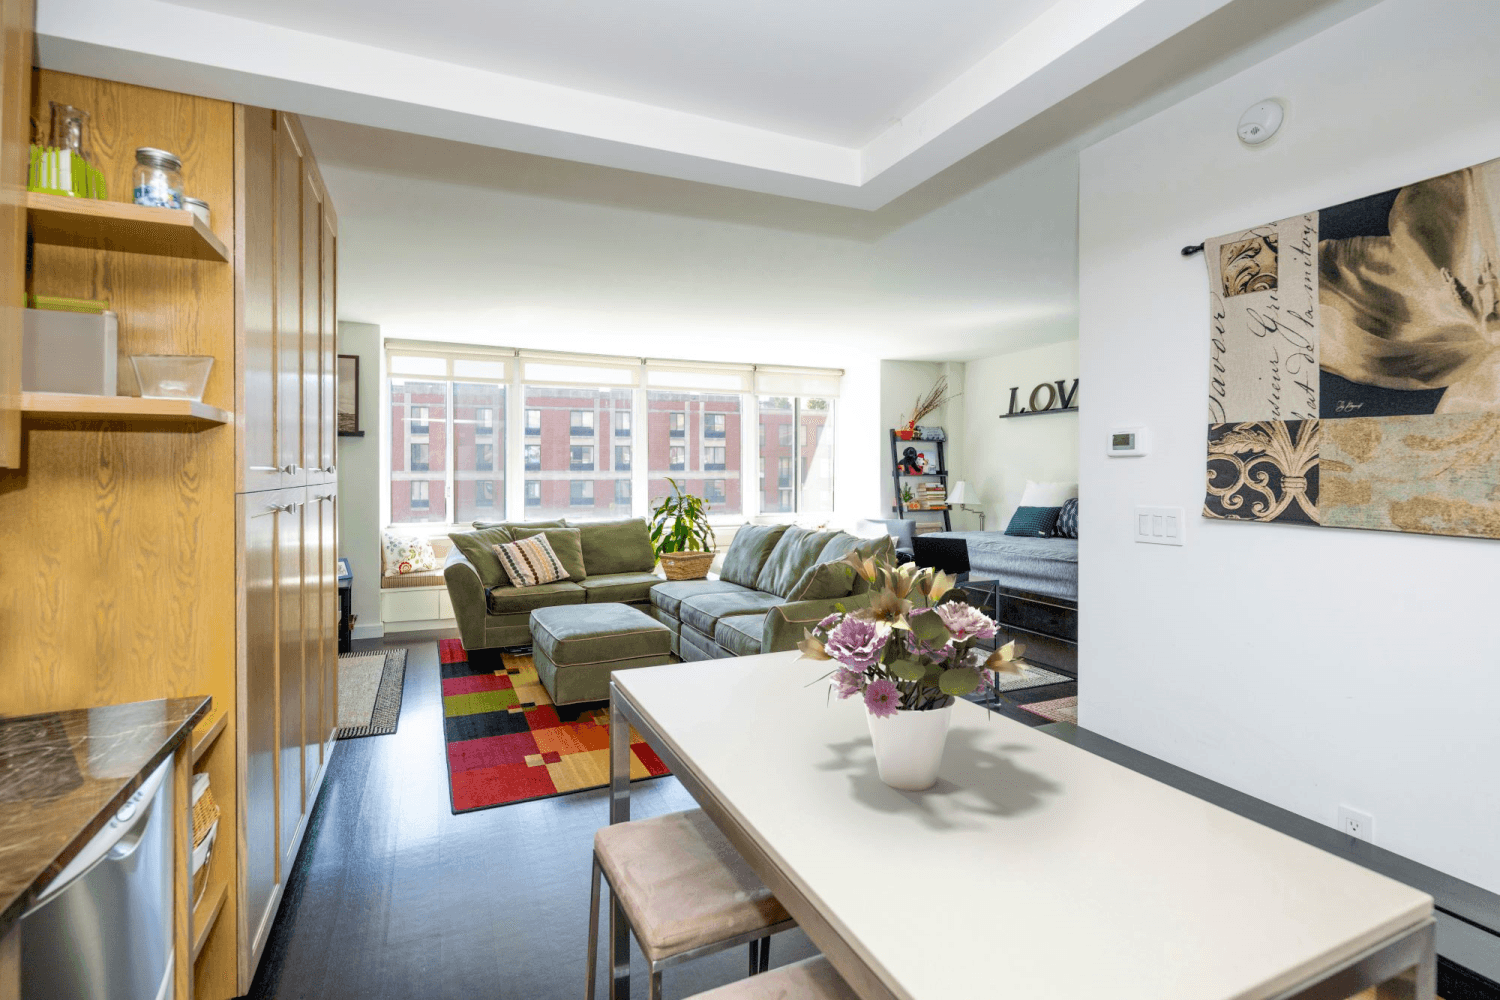 Welcome Home to this very large and bright south facing apartment with Hudson River views.